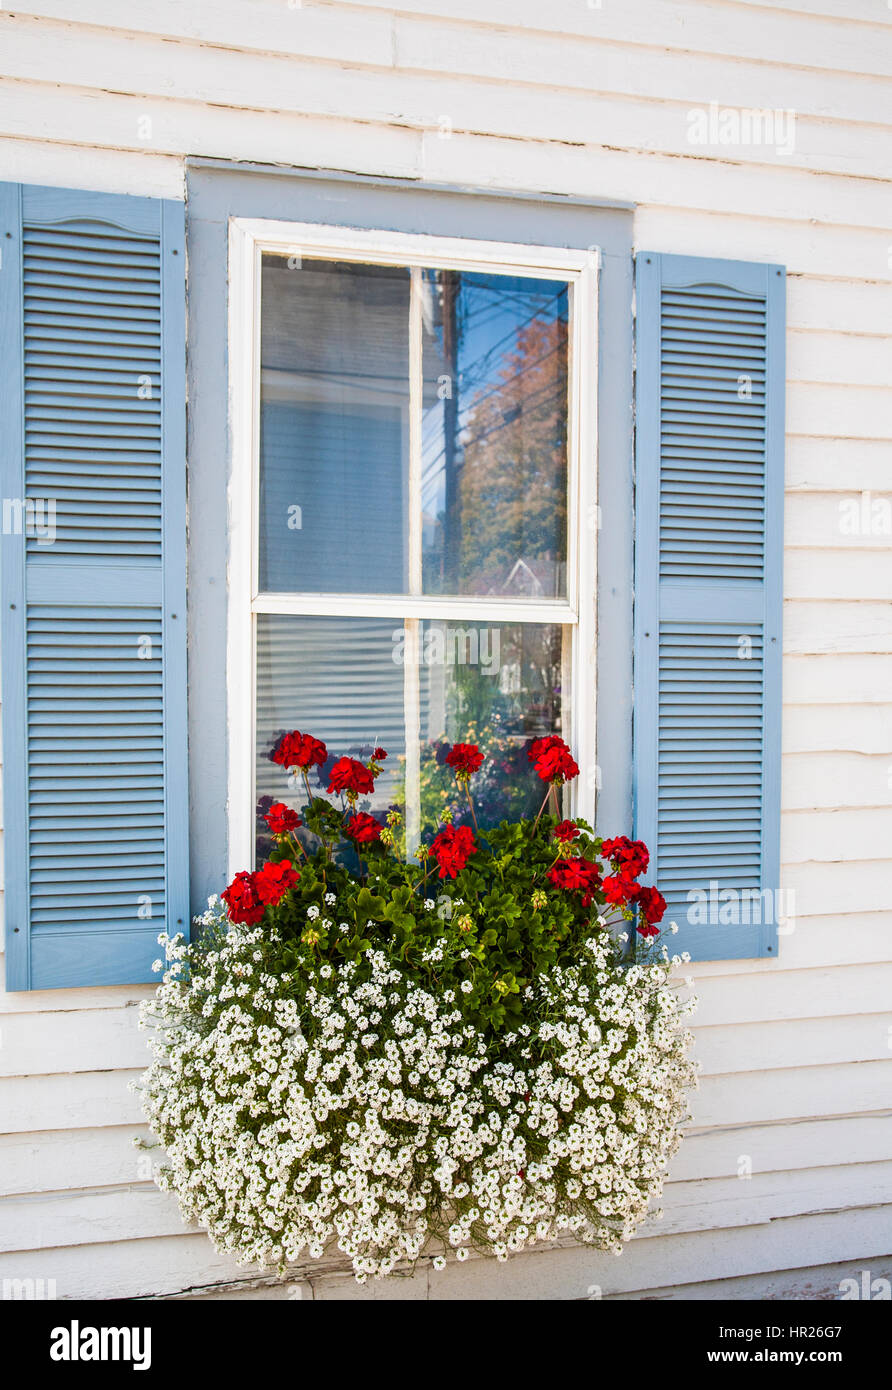 Vintage house window with blue shutters, window planter with red geranium flowers, snowflake flowers in Vermont, New England spring windowbox Stock Photo